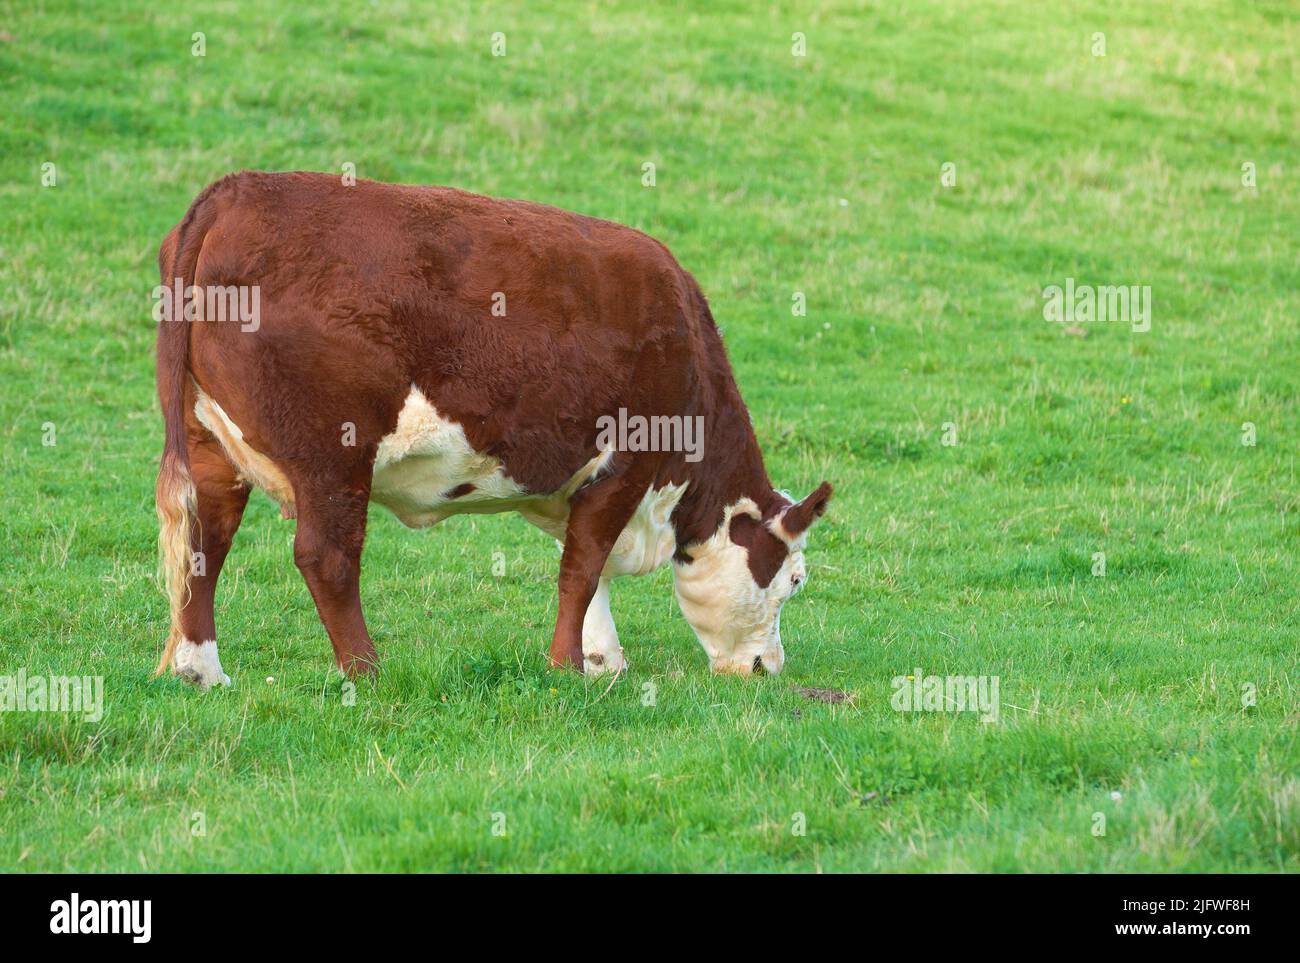 Breeding bovine animals for cattle farming on a meadow to produce milk or beef. Livestock grazing for food on open land in nature. Copy space with cow Stock Photo